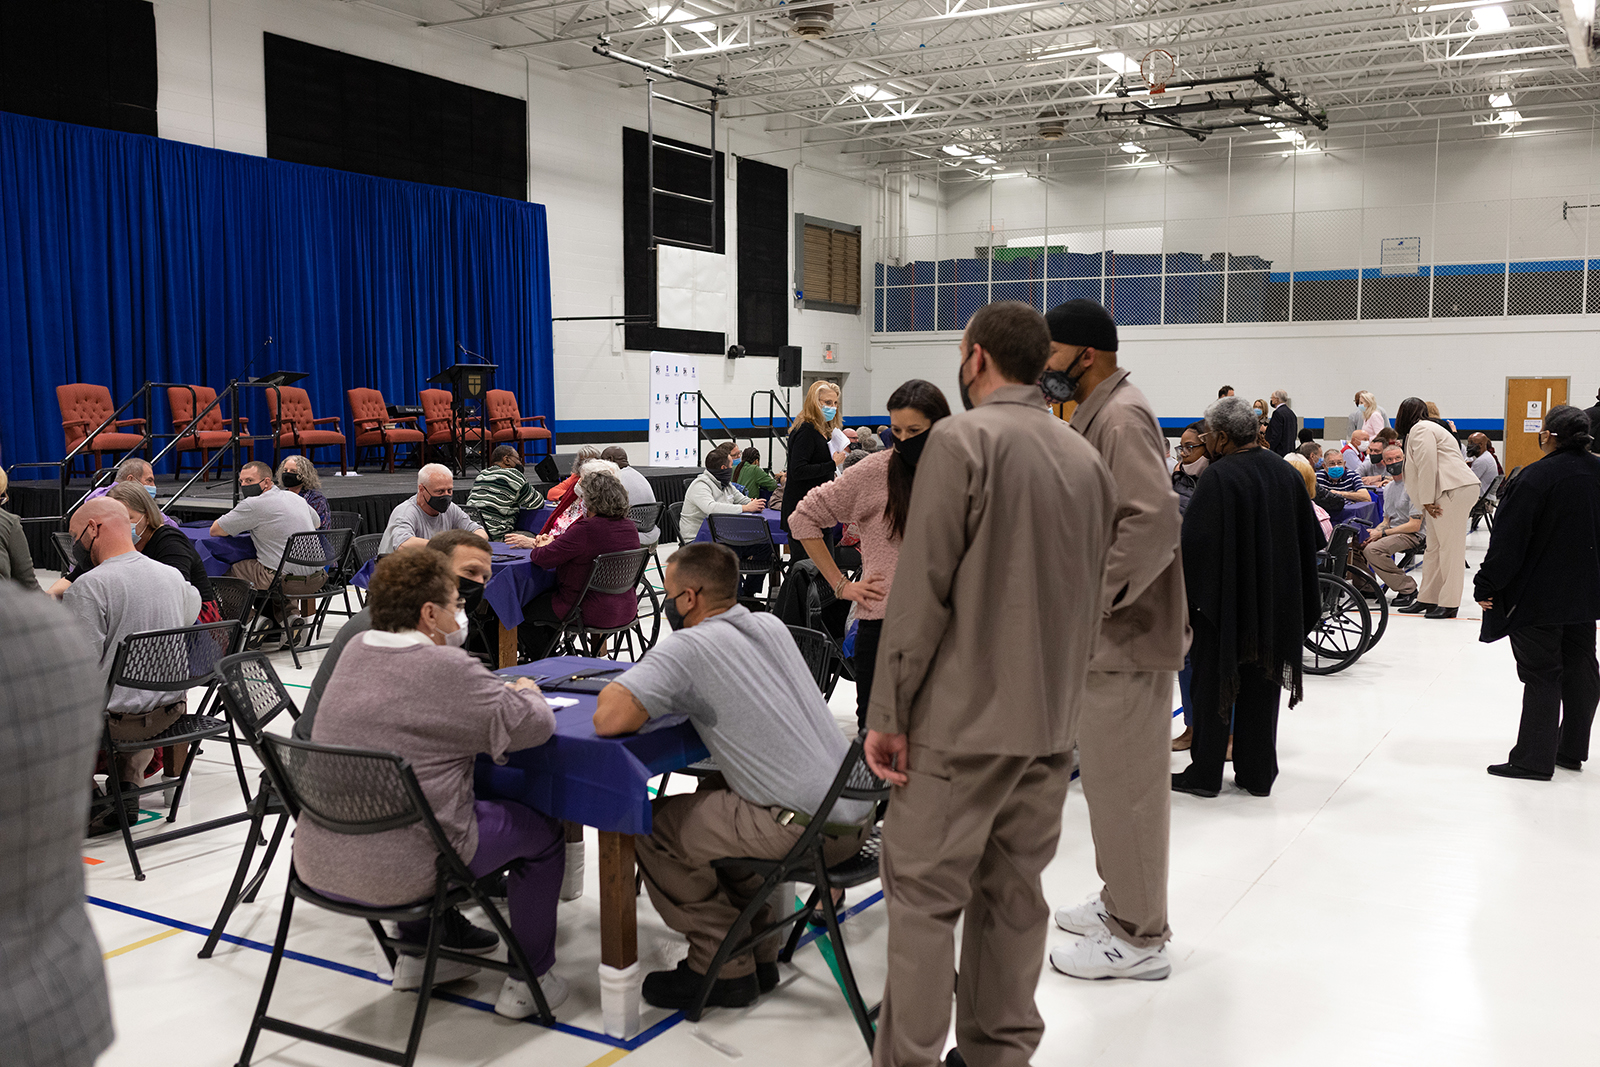 Graduate inmates visit guests during the College's graduation ceremony in the Southeast on Wednesday, December 15, 2021, at Nash Correctional Institution in Nashville, North Carolina.  Photo courtesy of Southeastern Baptist Theological Seminary in Wake Forest, NC